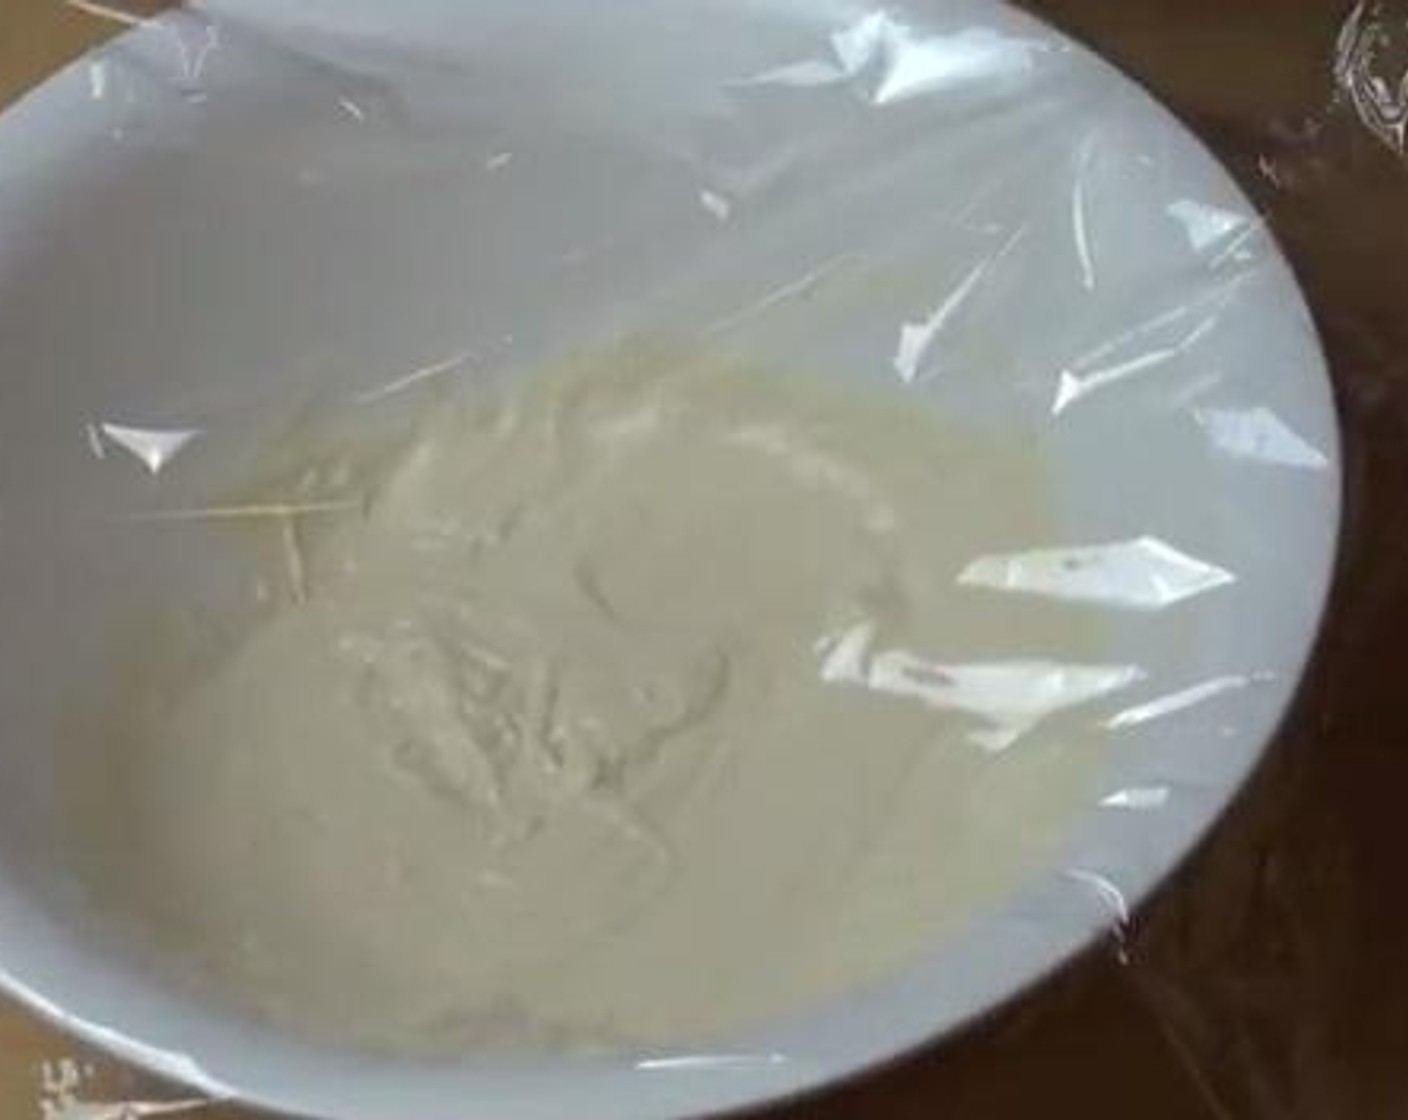 step 2 Into a large mixing bowl, add the All-Purpose Flour (1 1/2 cups), Salt (1 pinch), Milk (1/2 cup), Water (1/2 cup) and the yeast mixture. Whisk everything together until combined. Cover the bowl with a thin film, and set aside for about an hour